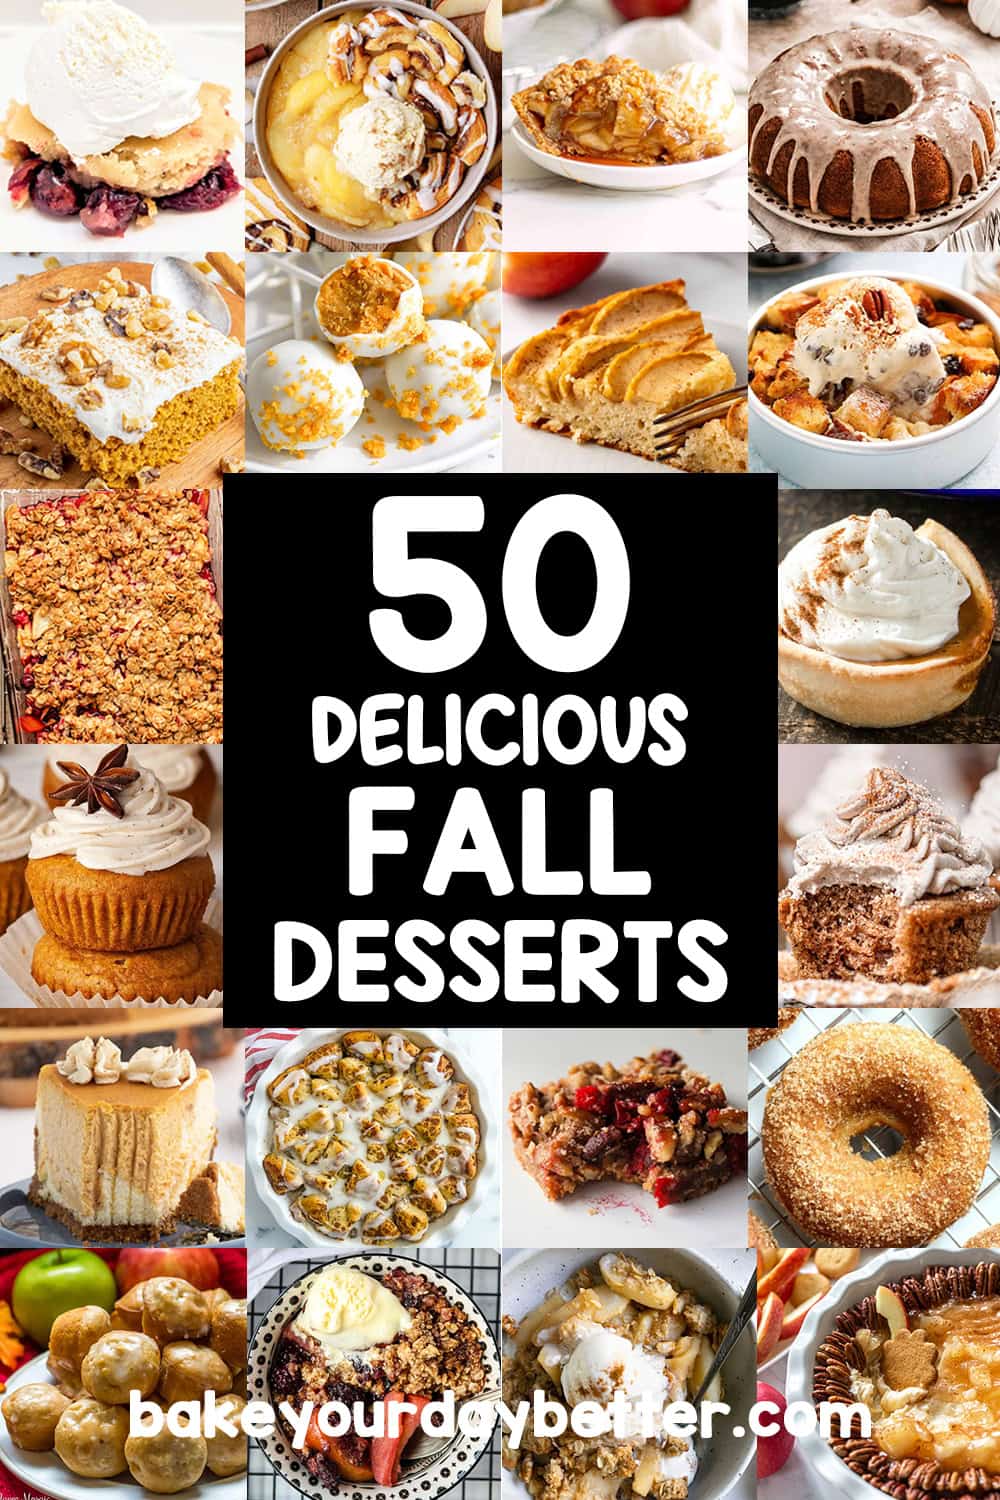 pictures of different fall desserts with text overlay that says: 50 delicious fall desserts